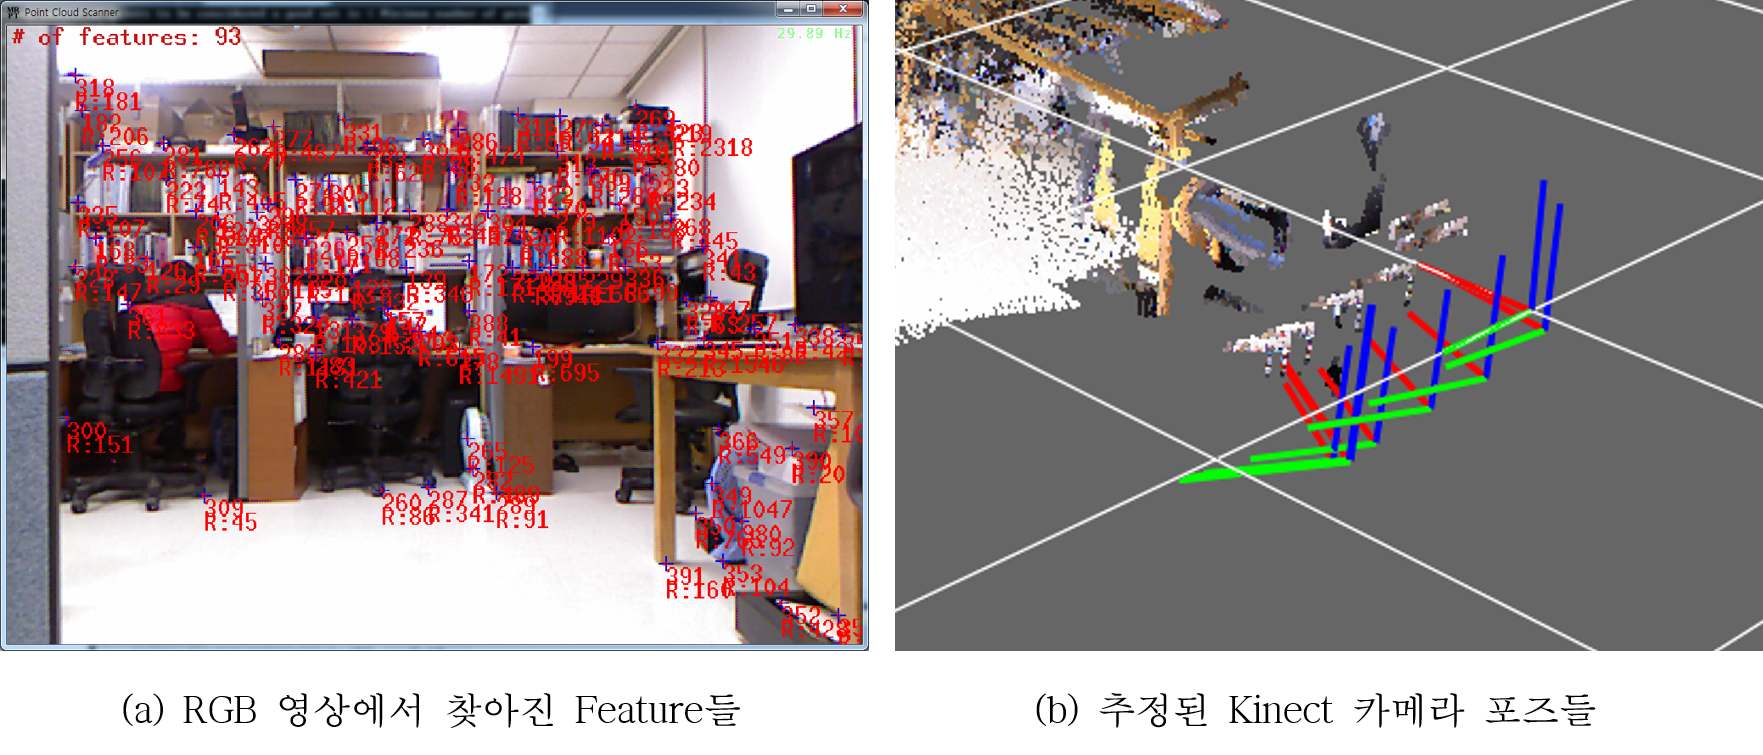 (Tracked features and estimated Kinect camera pose)